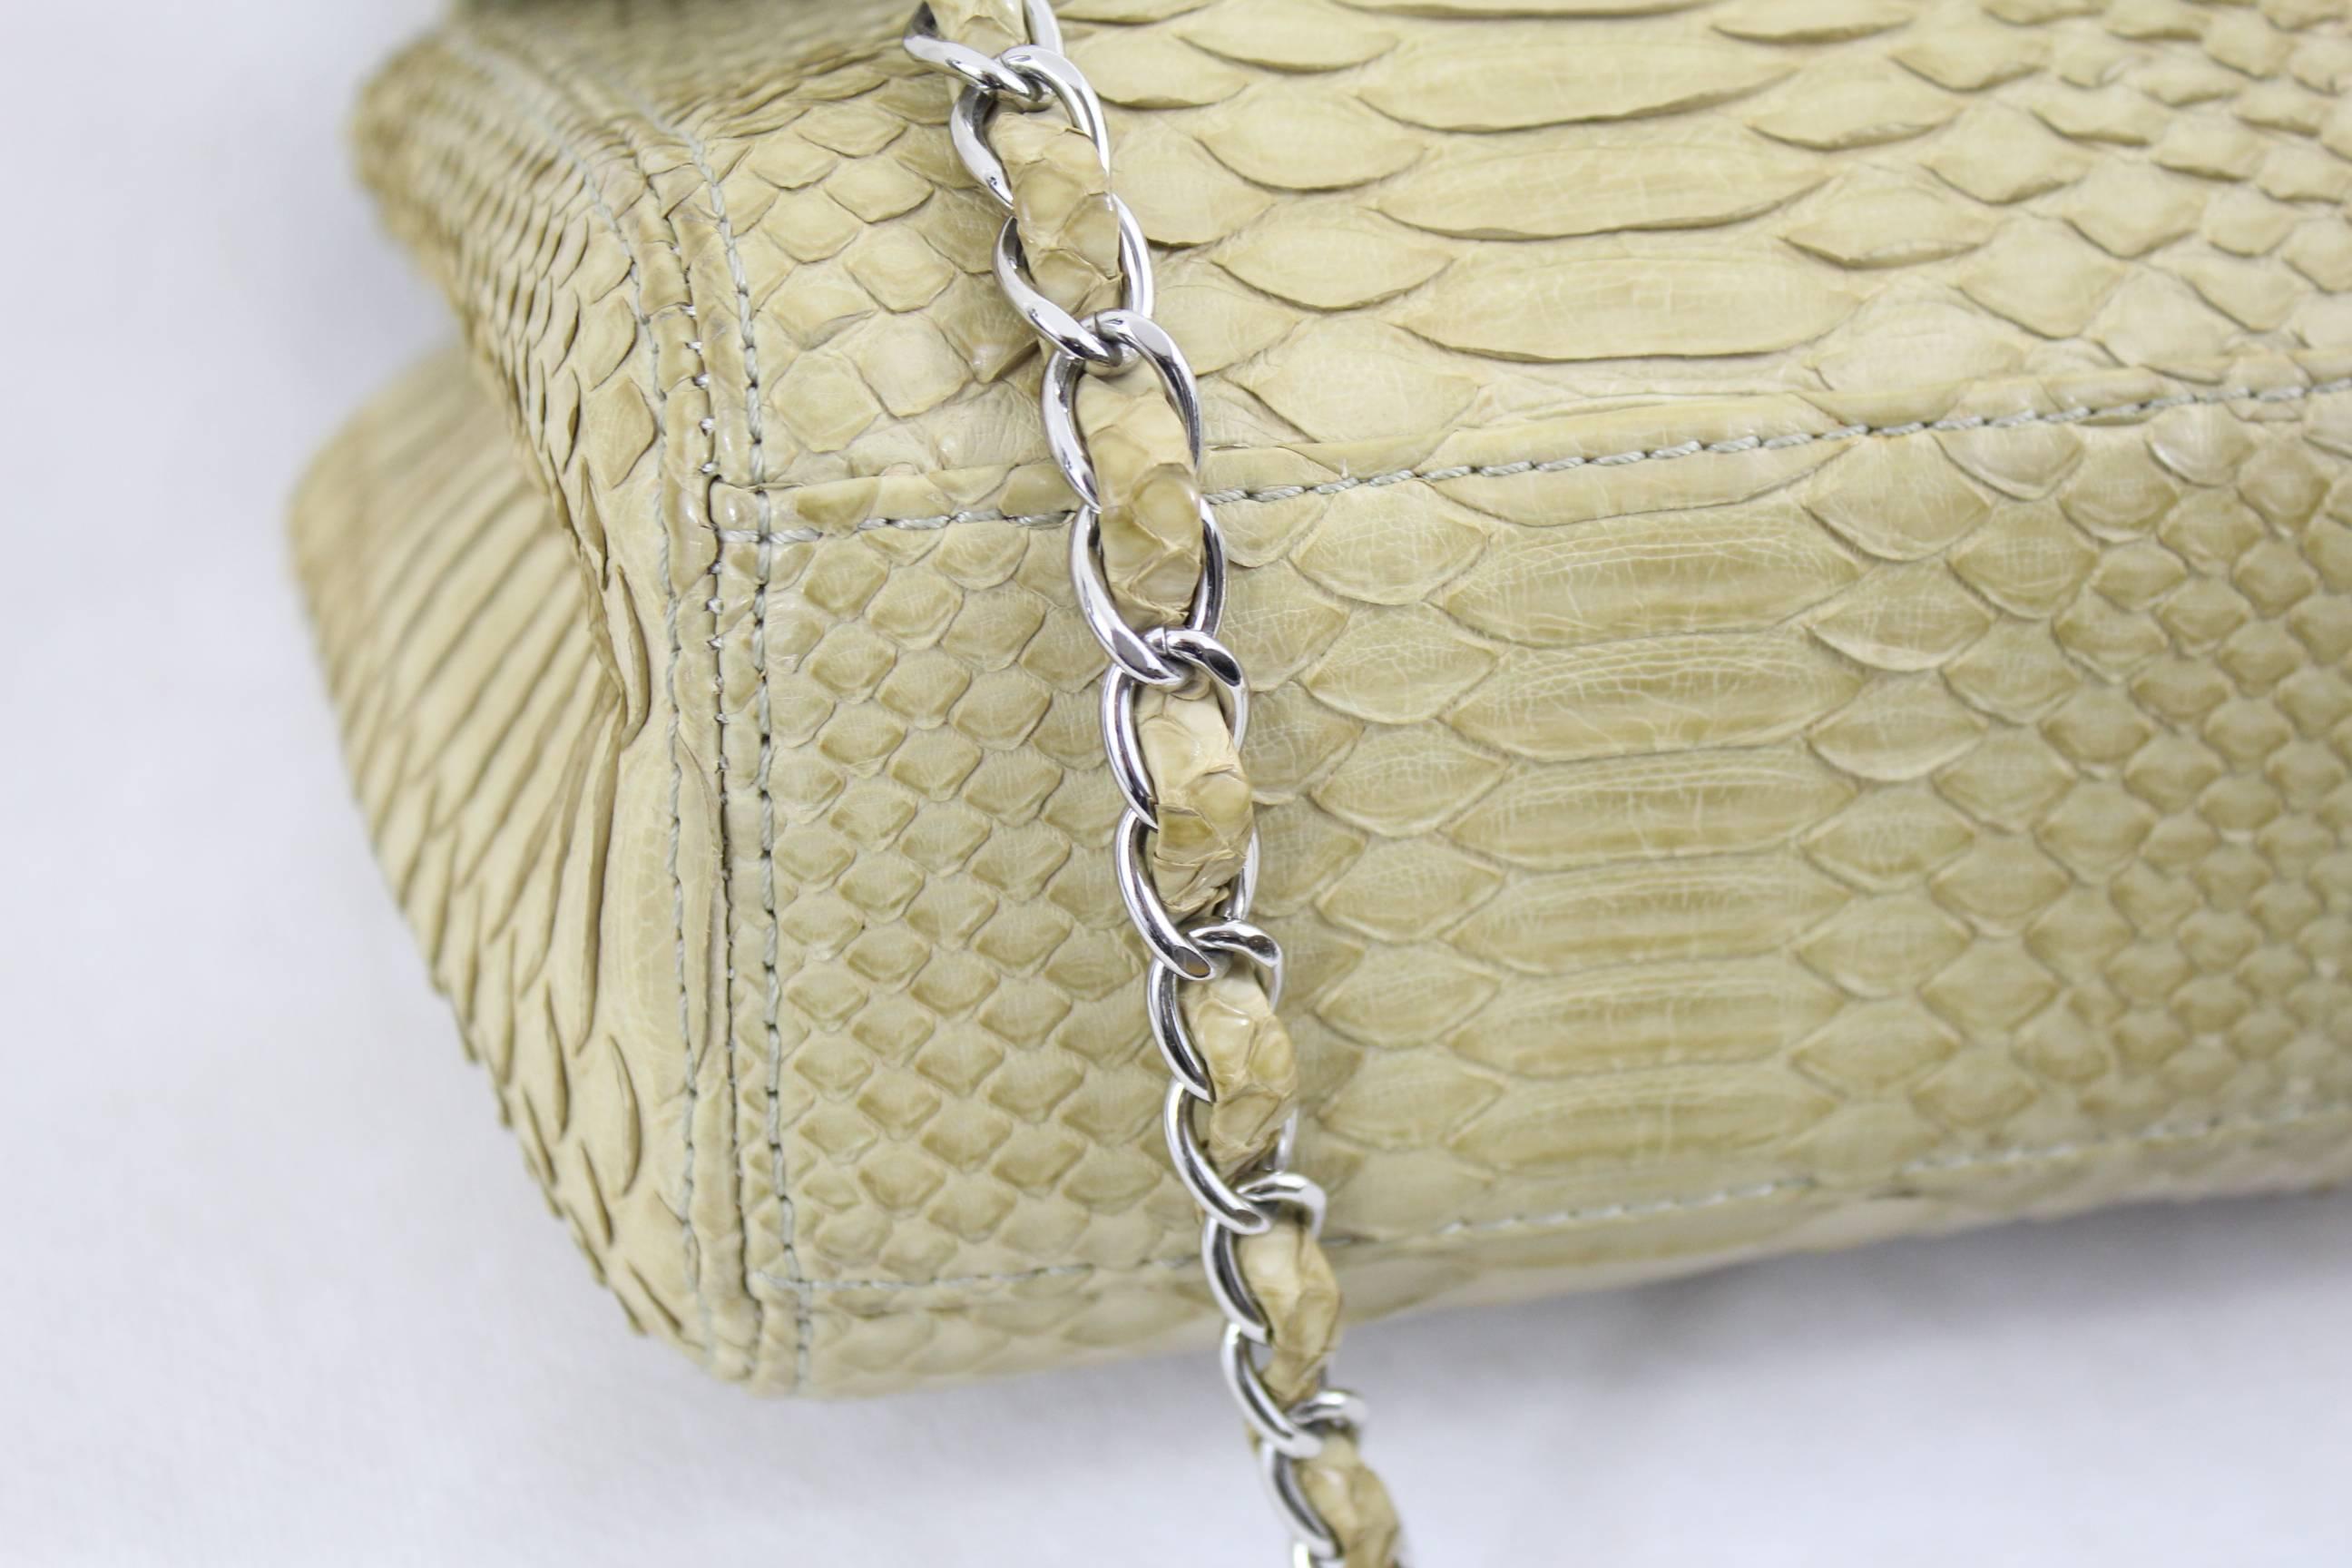 Women's Chanel Timeless Bag in Exotic skin and stainless steel  hardware